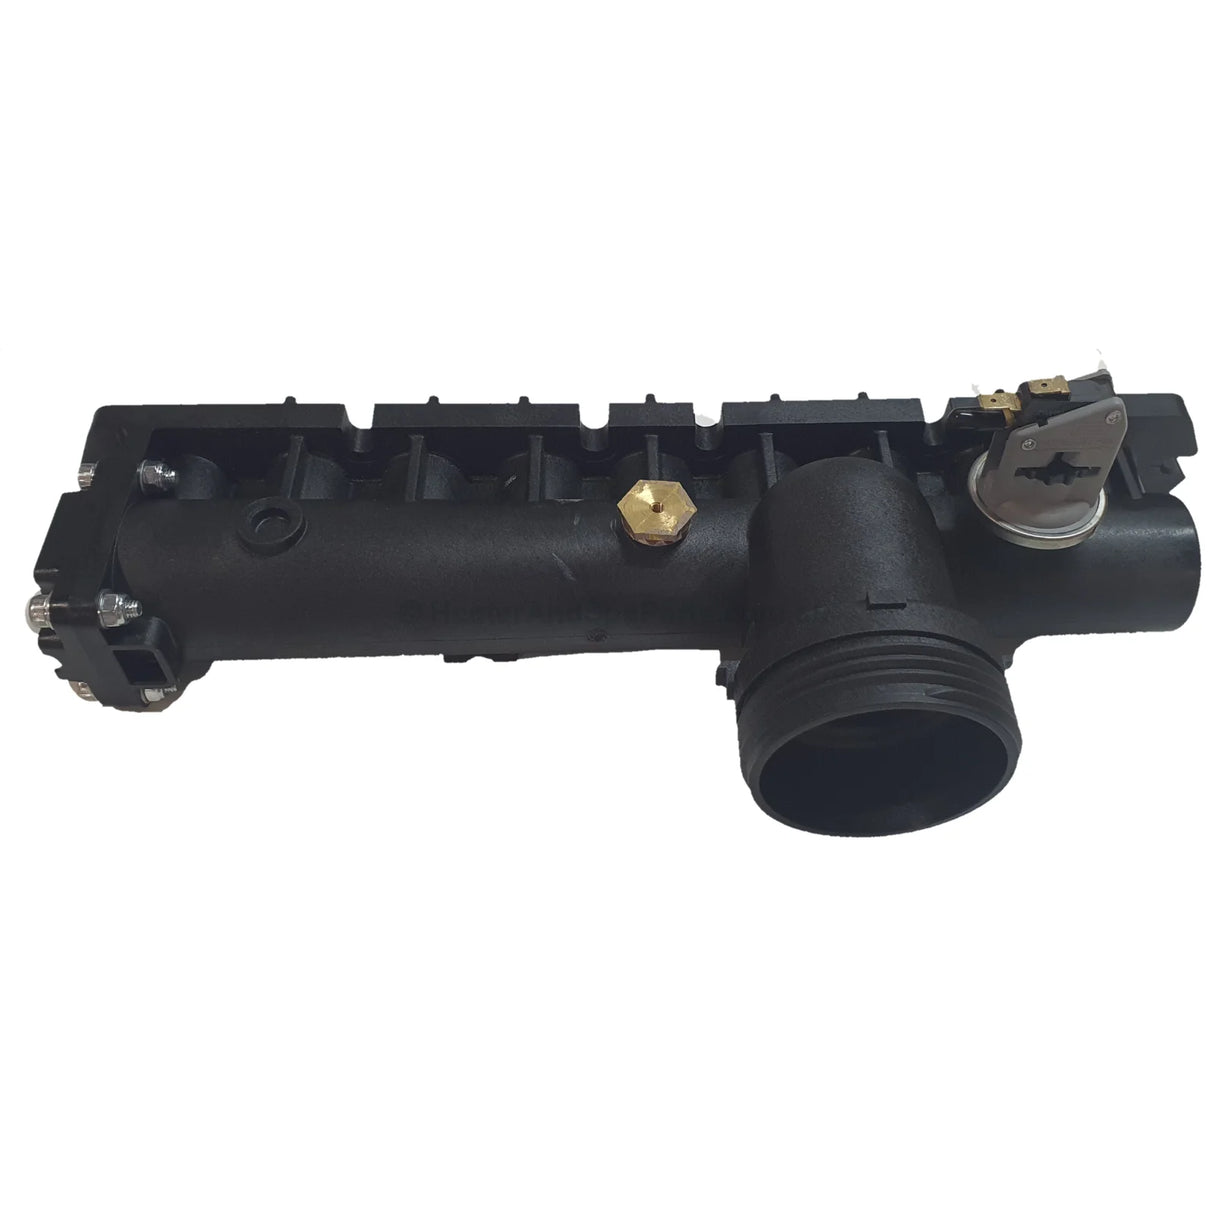 Astralpool Viron eVo Gas Heater Manifold Headers - 2013 to Current - Heater and Spa Parts